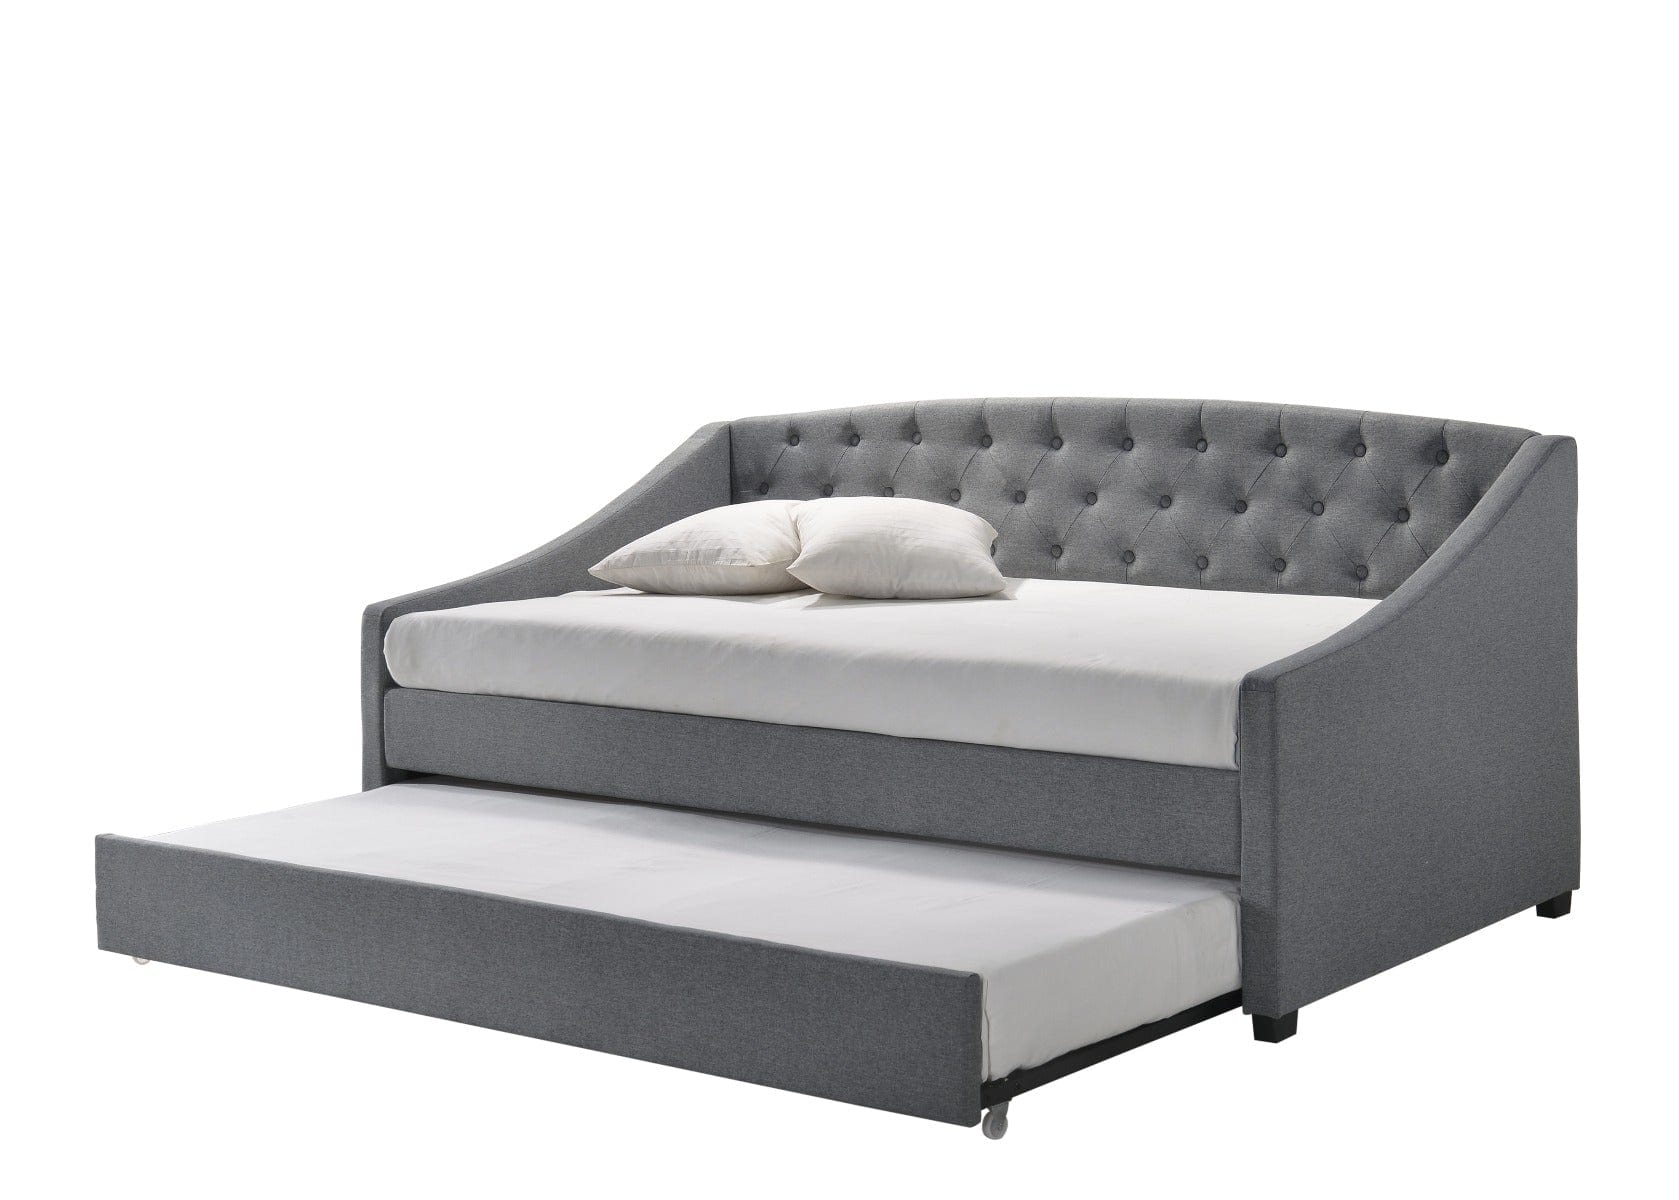 Daybed with trundle bed frame fabric upholstery - grey